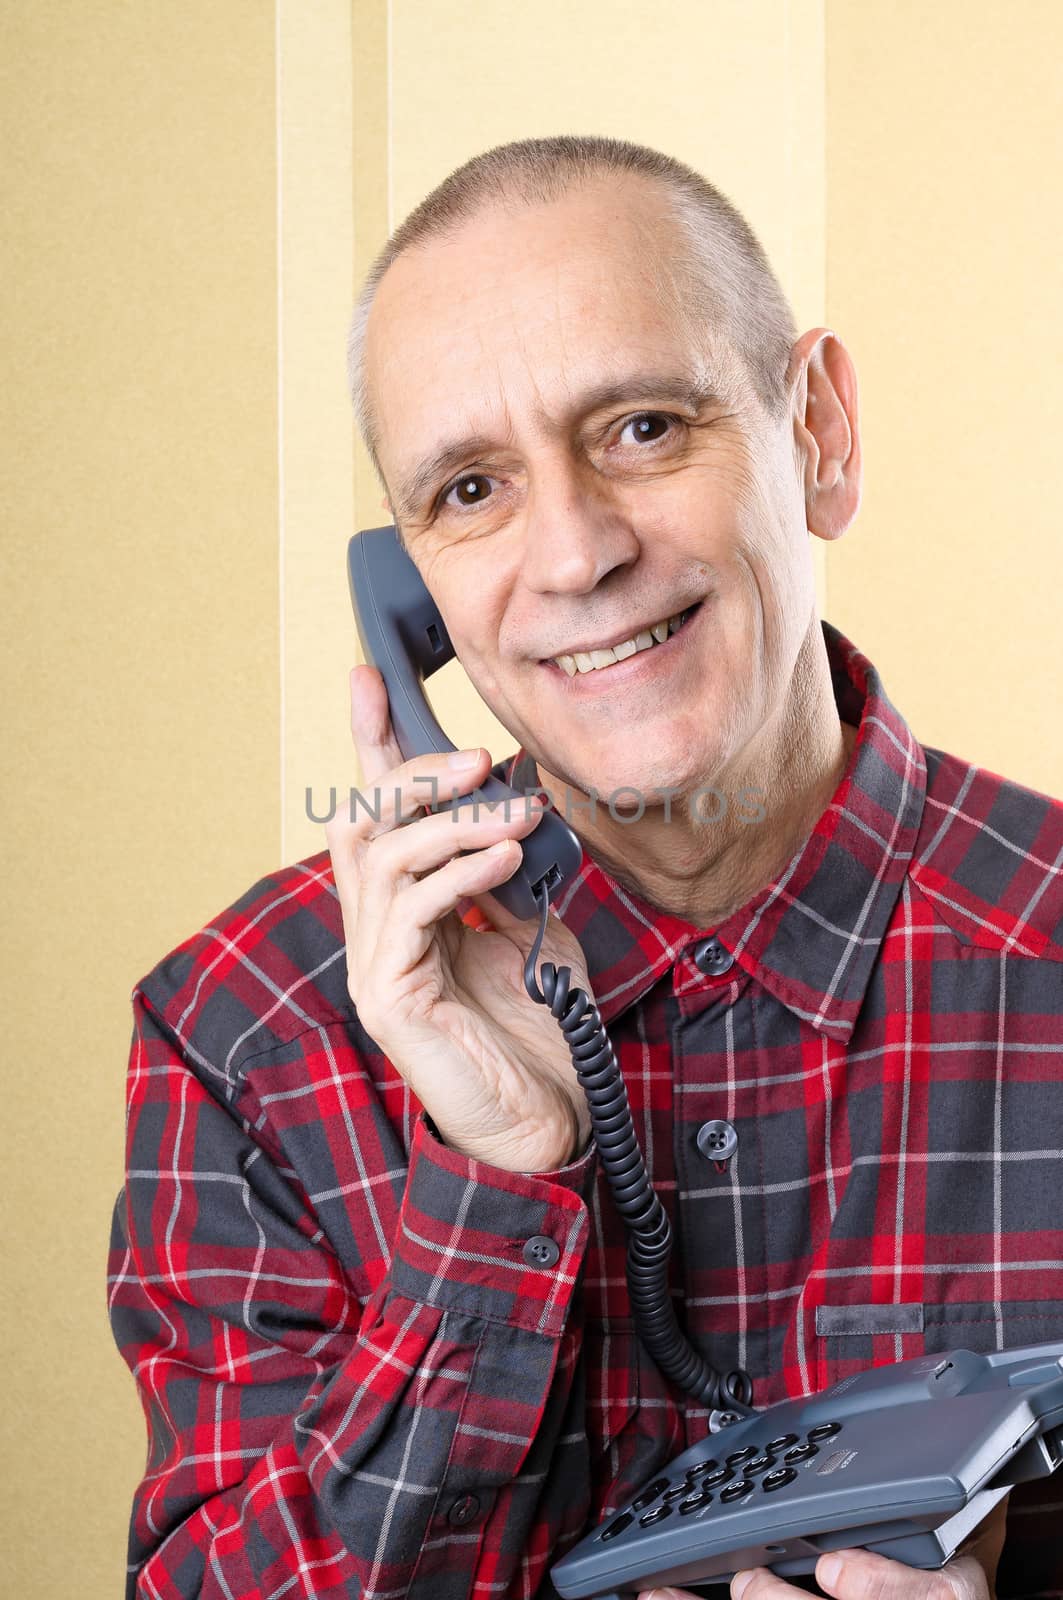 Cheerful man smiling and speaking on phone